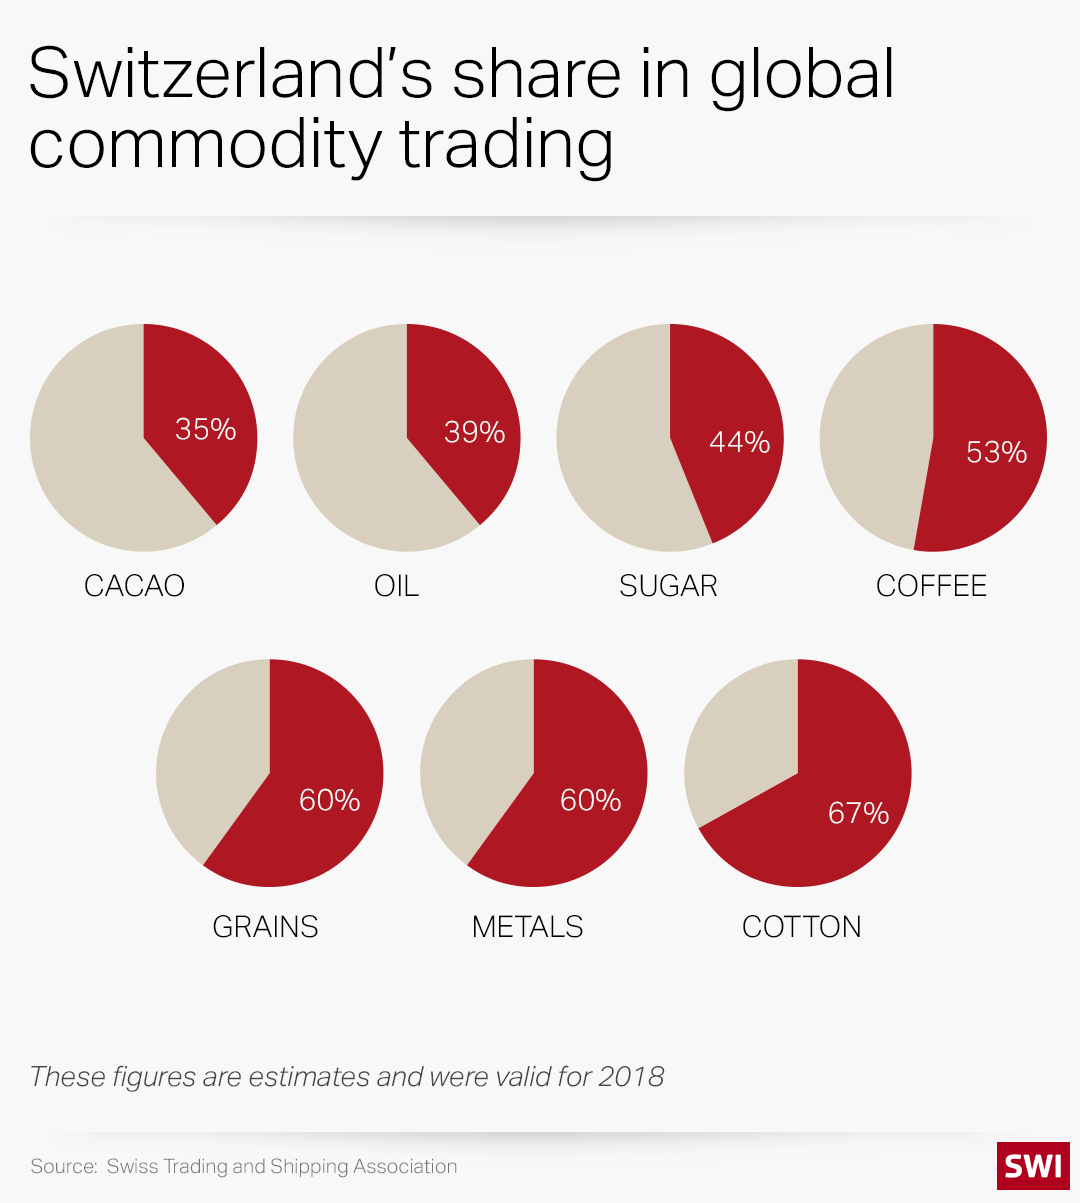 Graphic showing Swiss share of global commodity trading